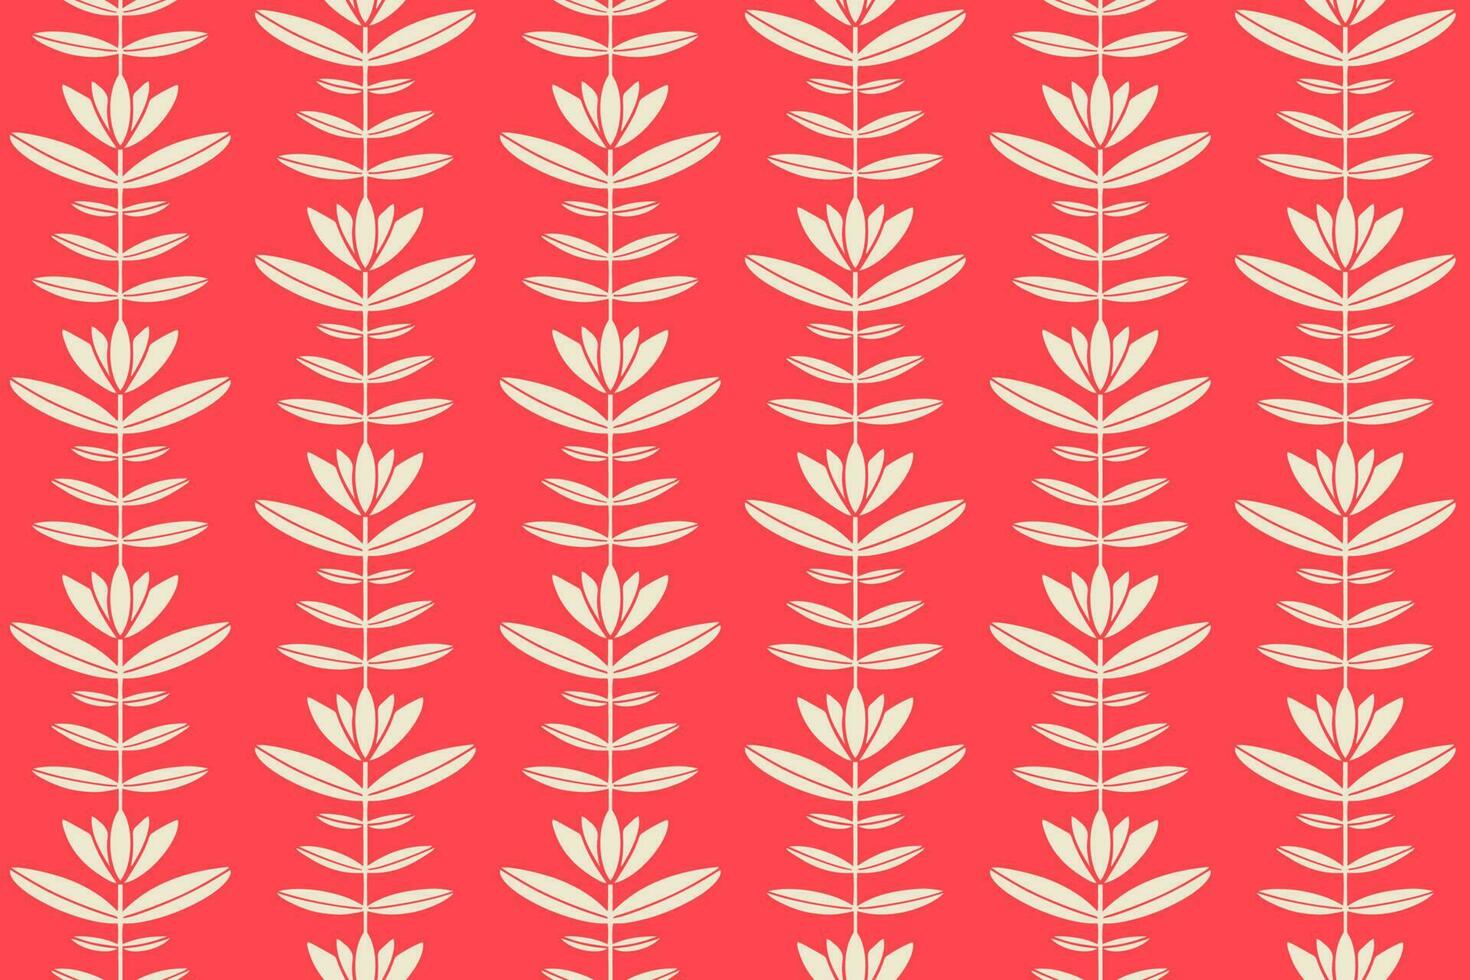 Floral seamless pattern design. Hand drawn lotuses flowers on red background. Ornate vector florals for stationery, textile design.